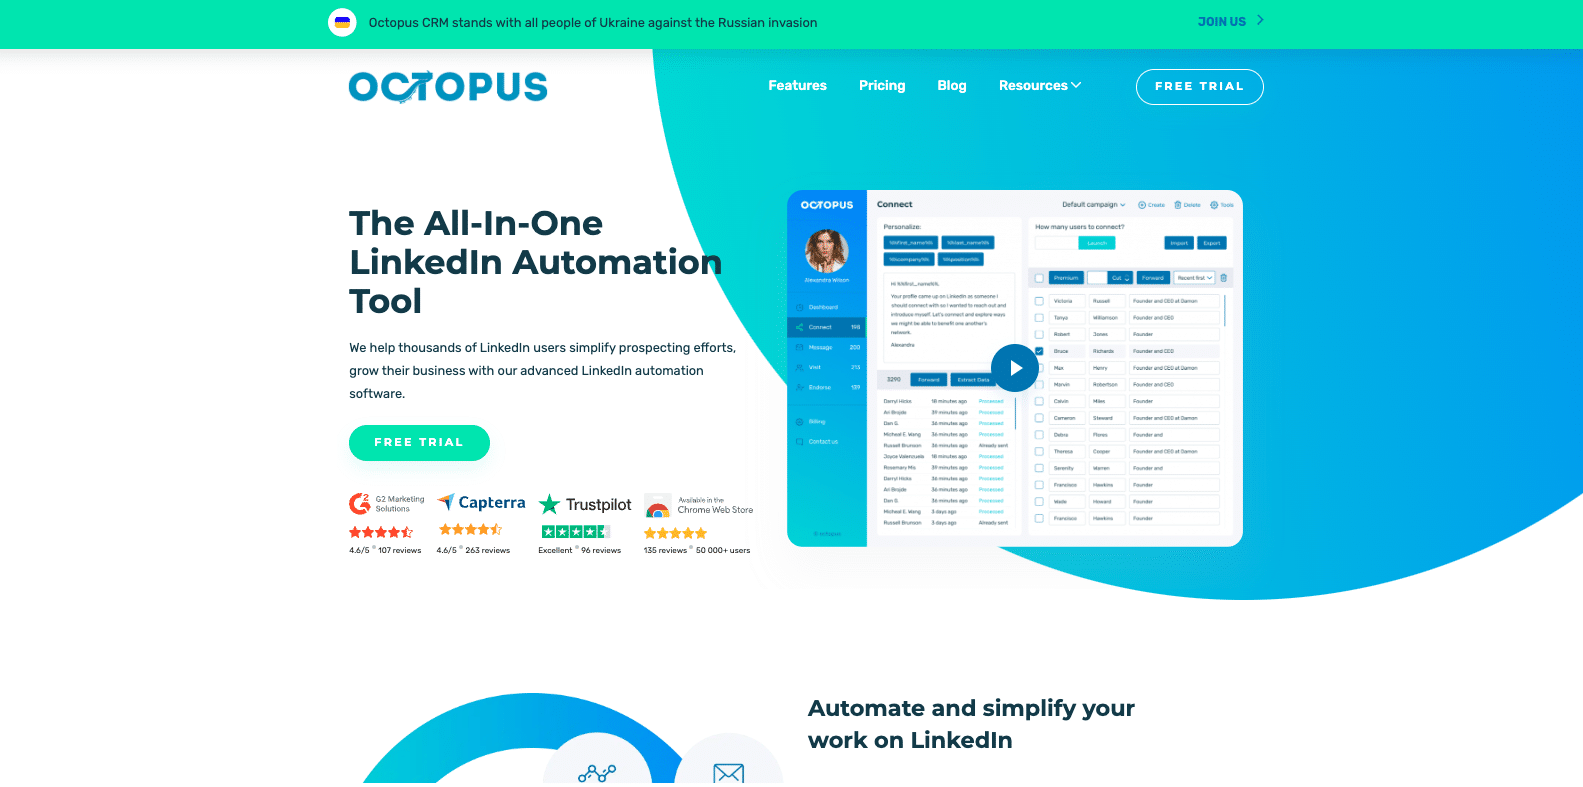 Homepage on the Octopus CRM website